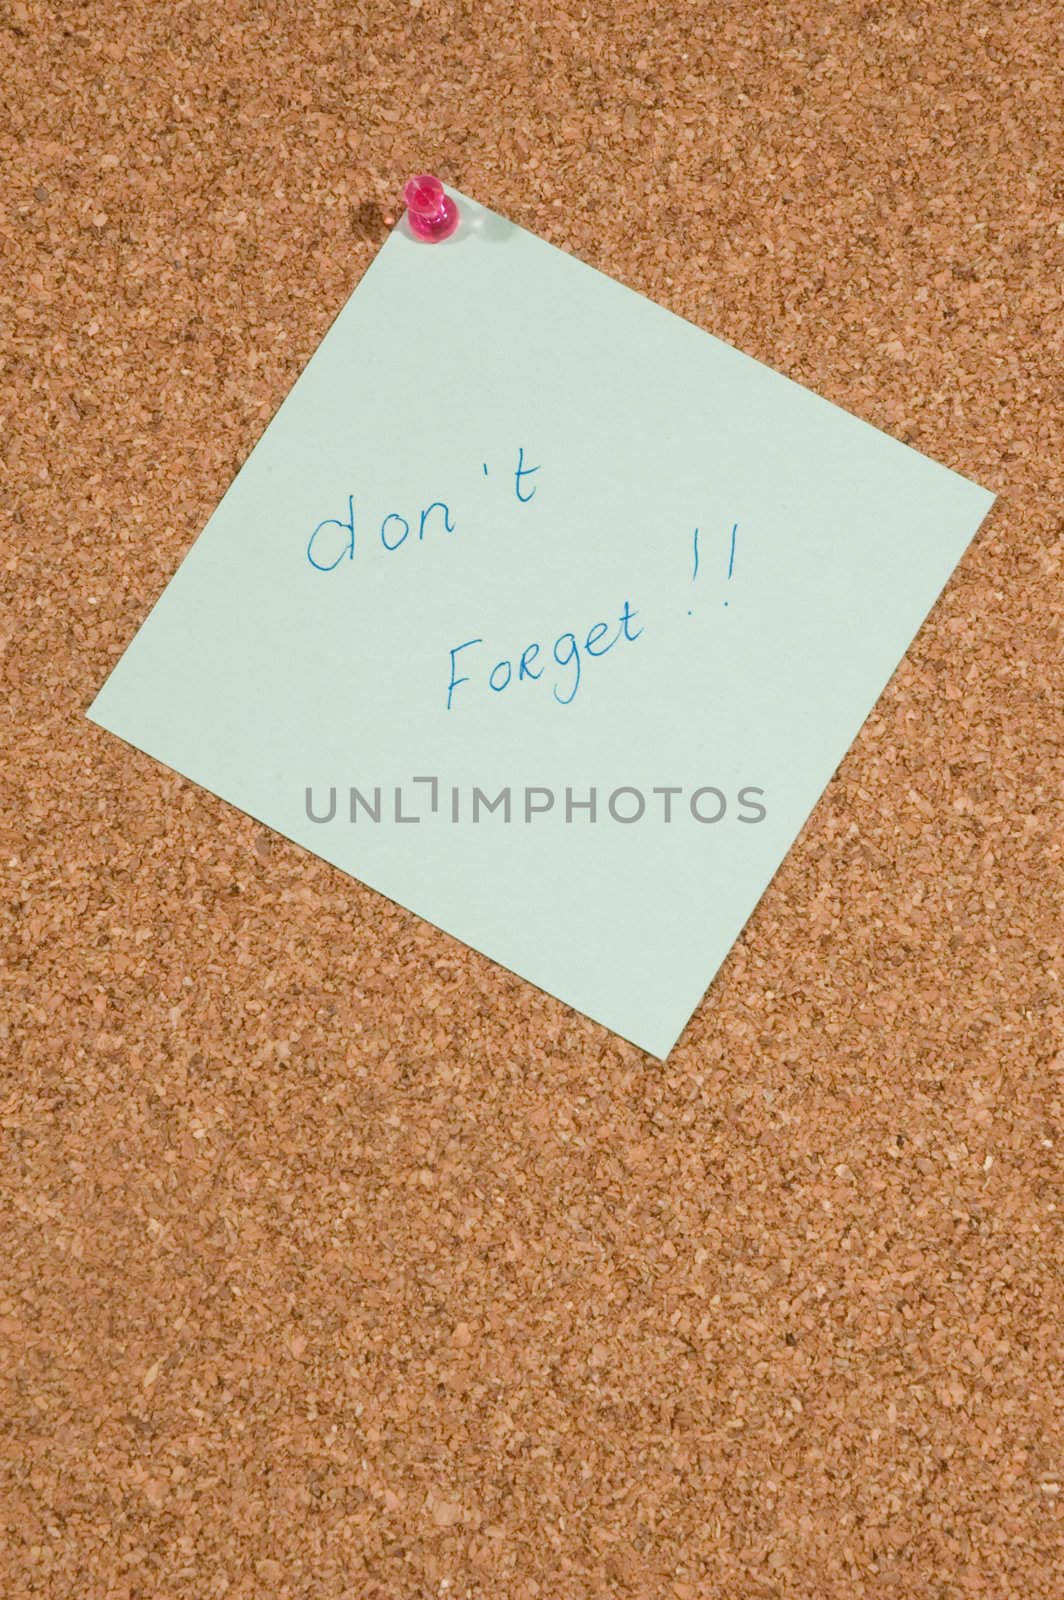 memo board with message: dont forget by ladyminnie